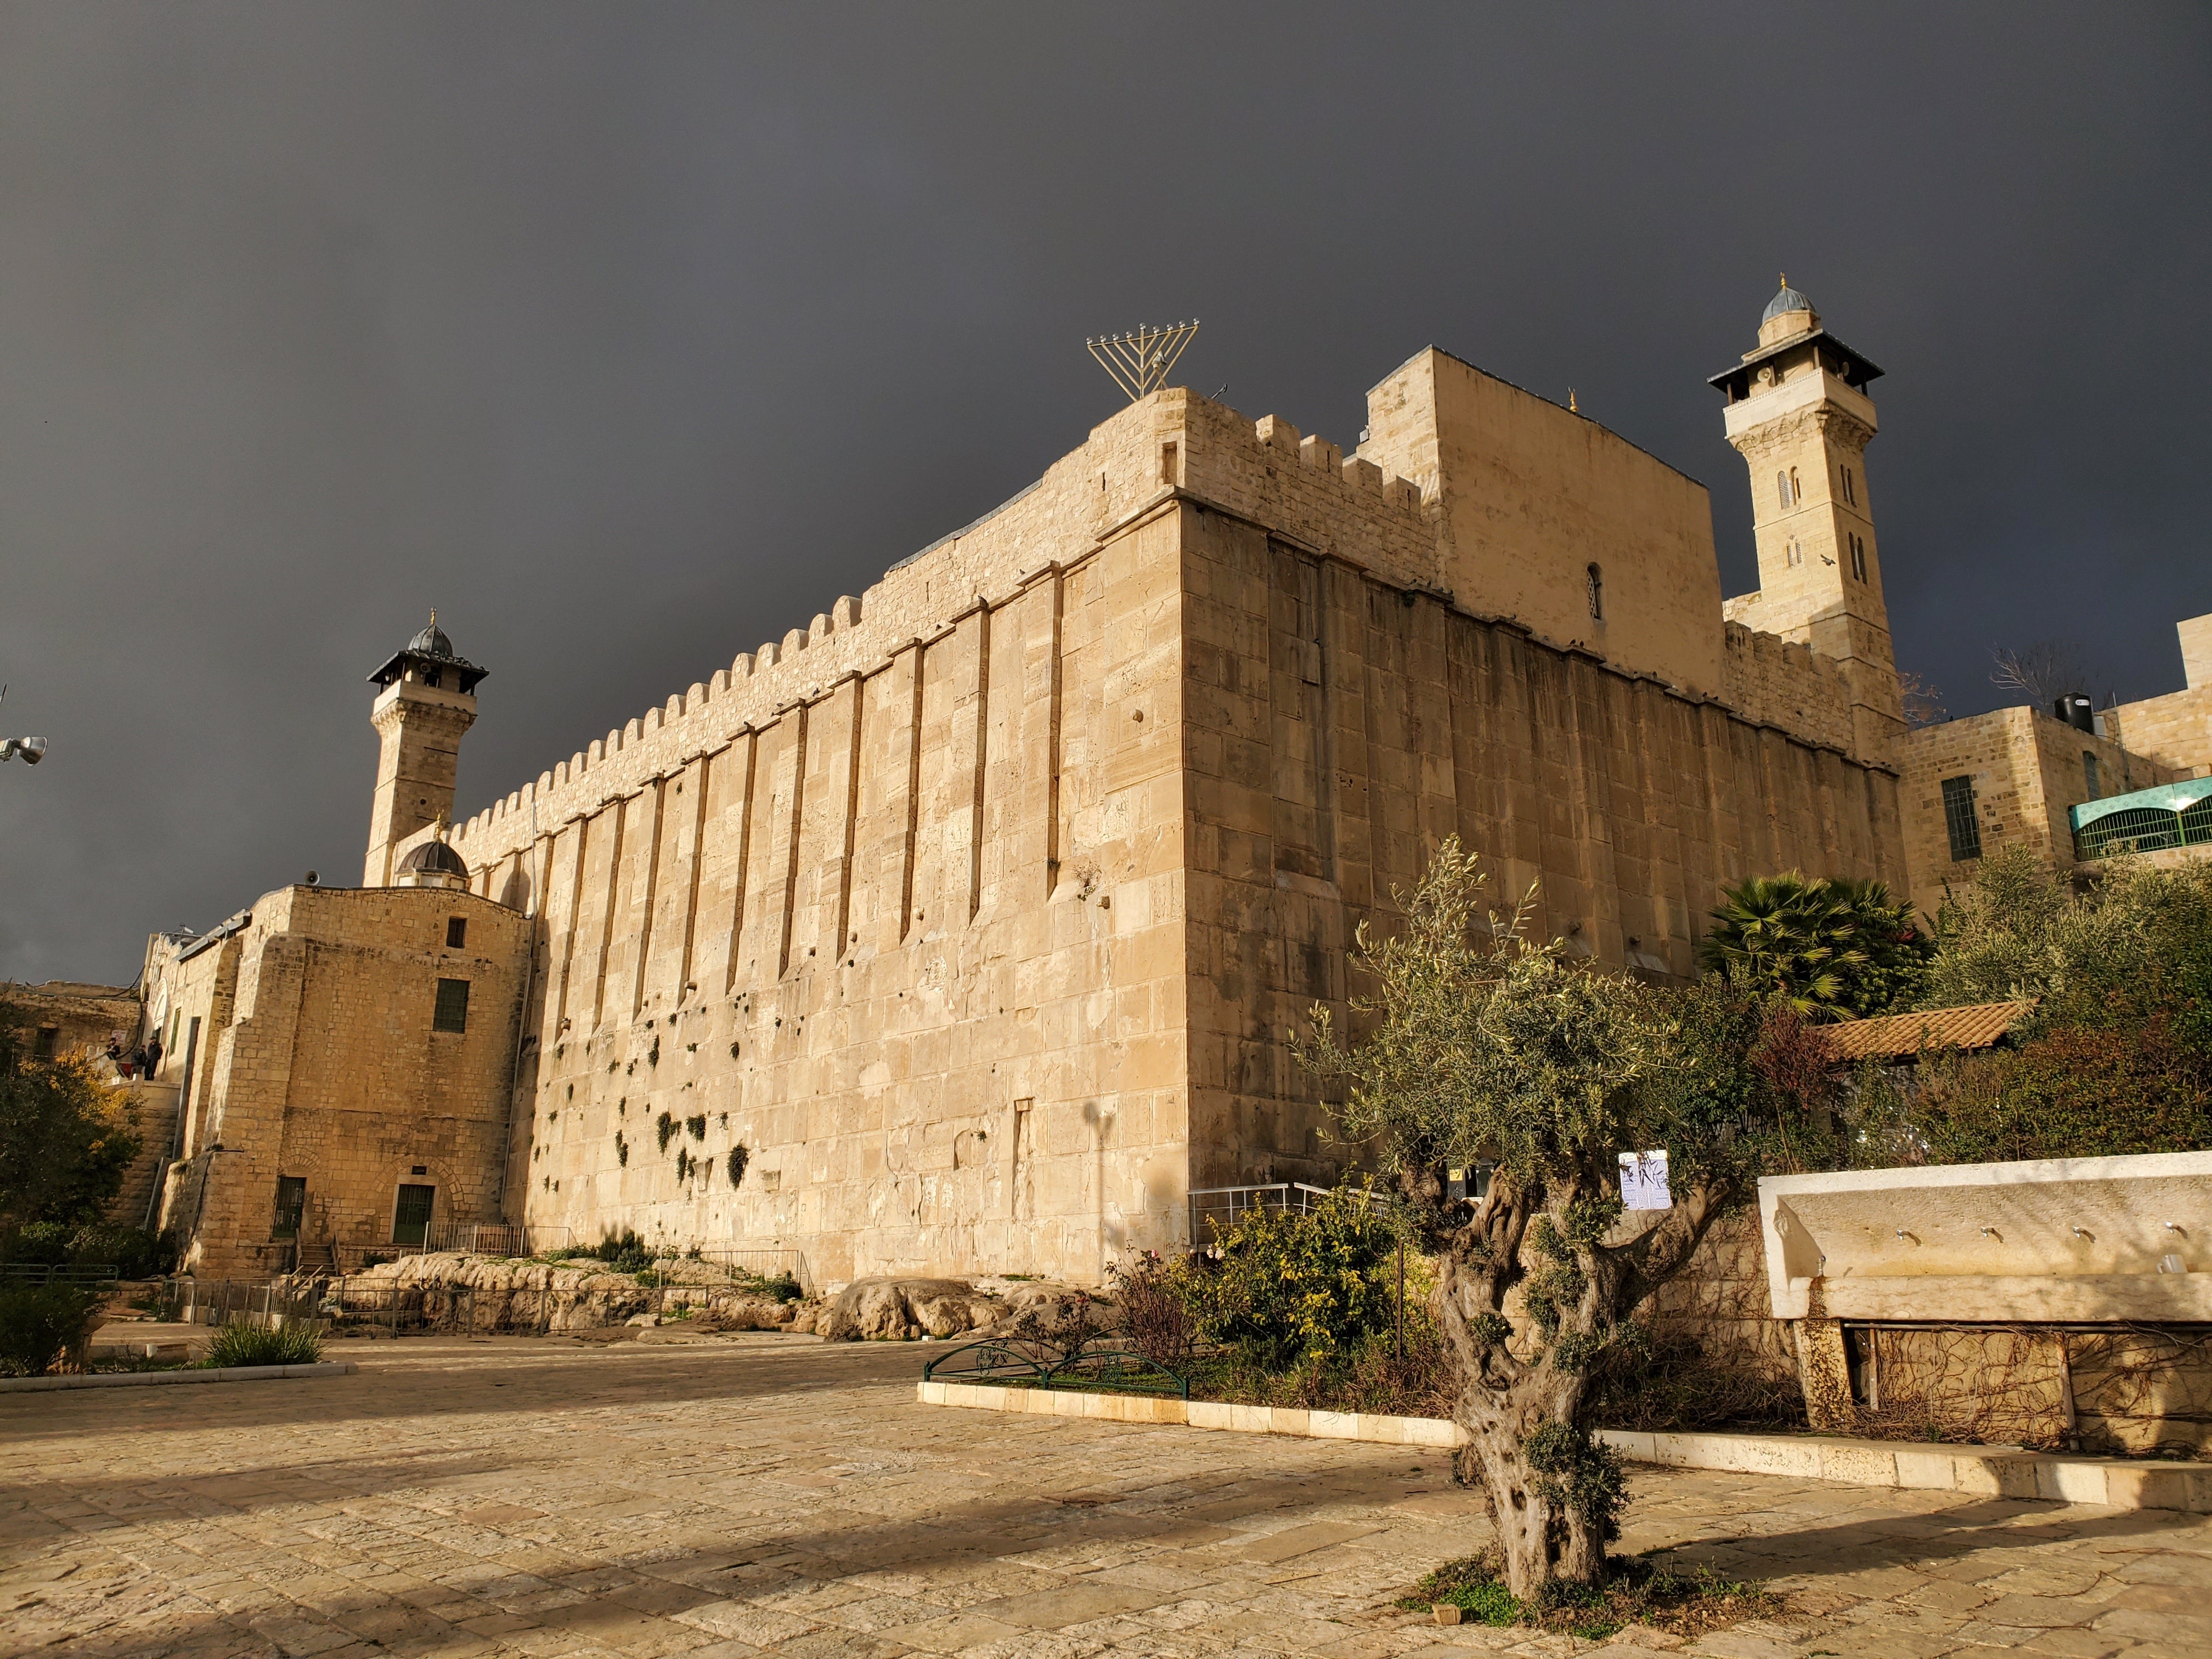 Baby Jesus and Banksy: A Half-Day Tour of Bethlehem